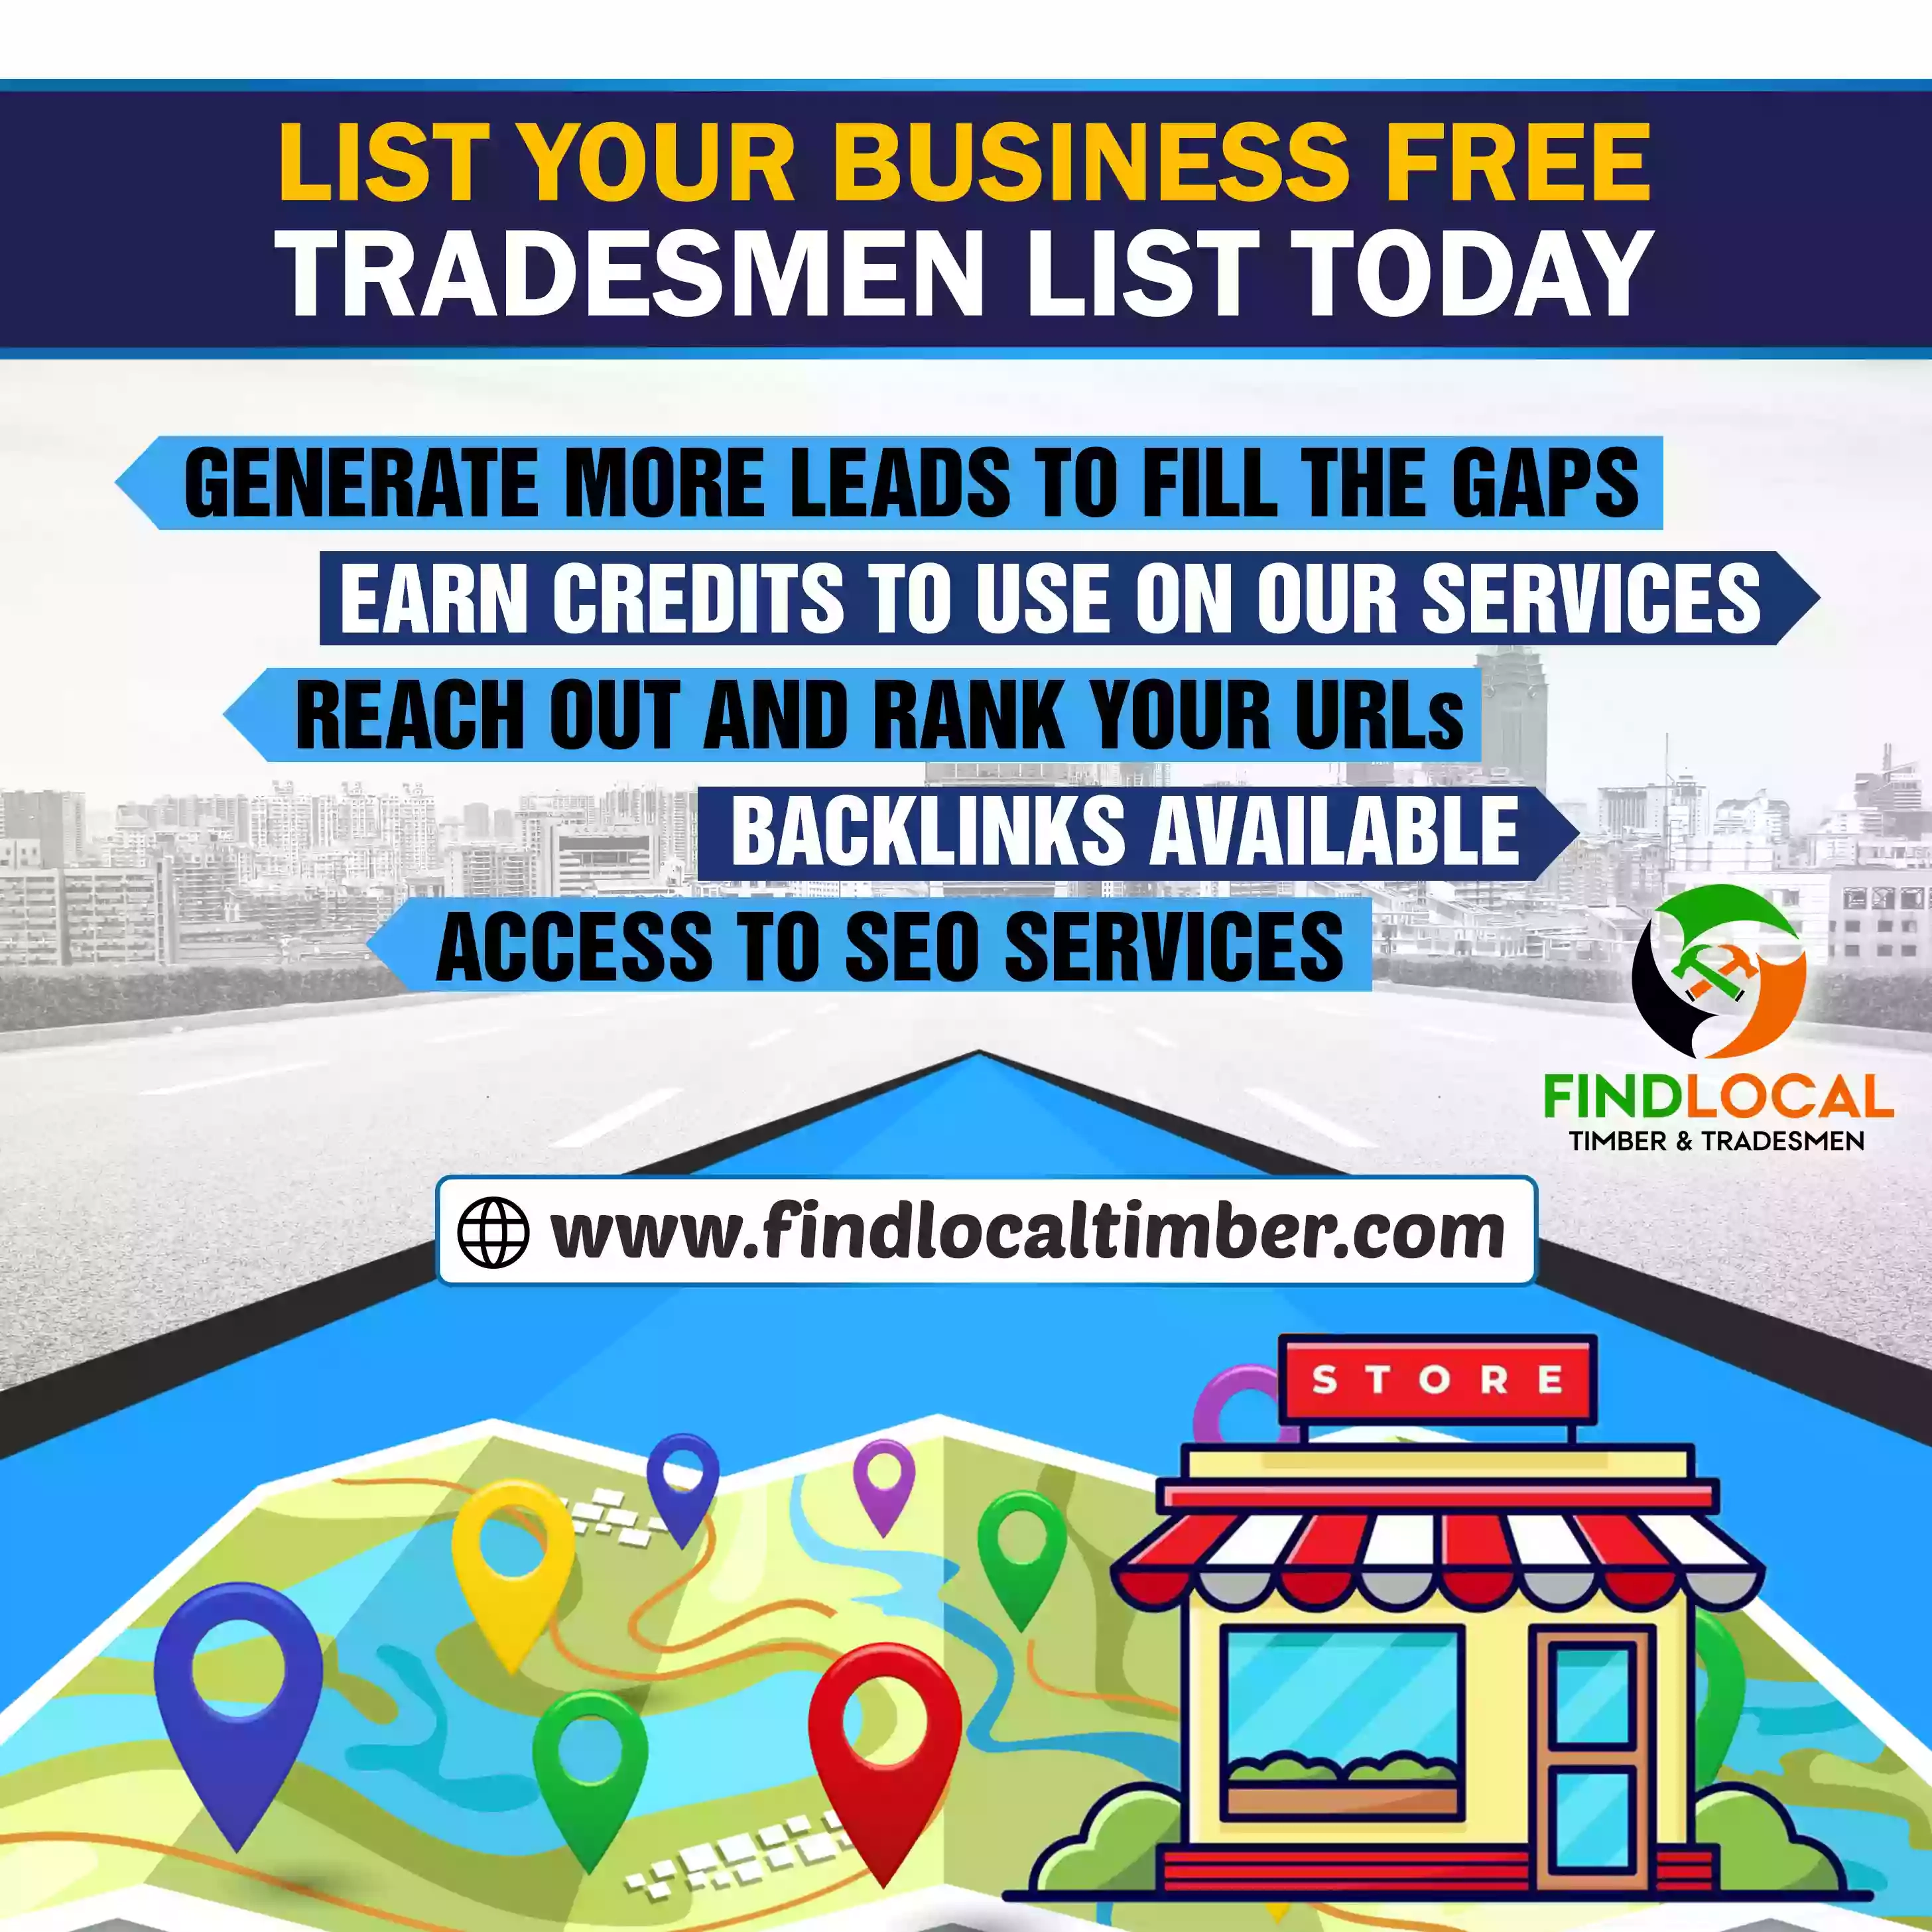 Find Local Timber & Tradesmen